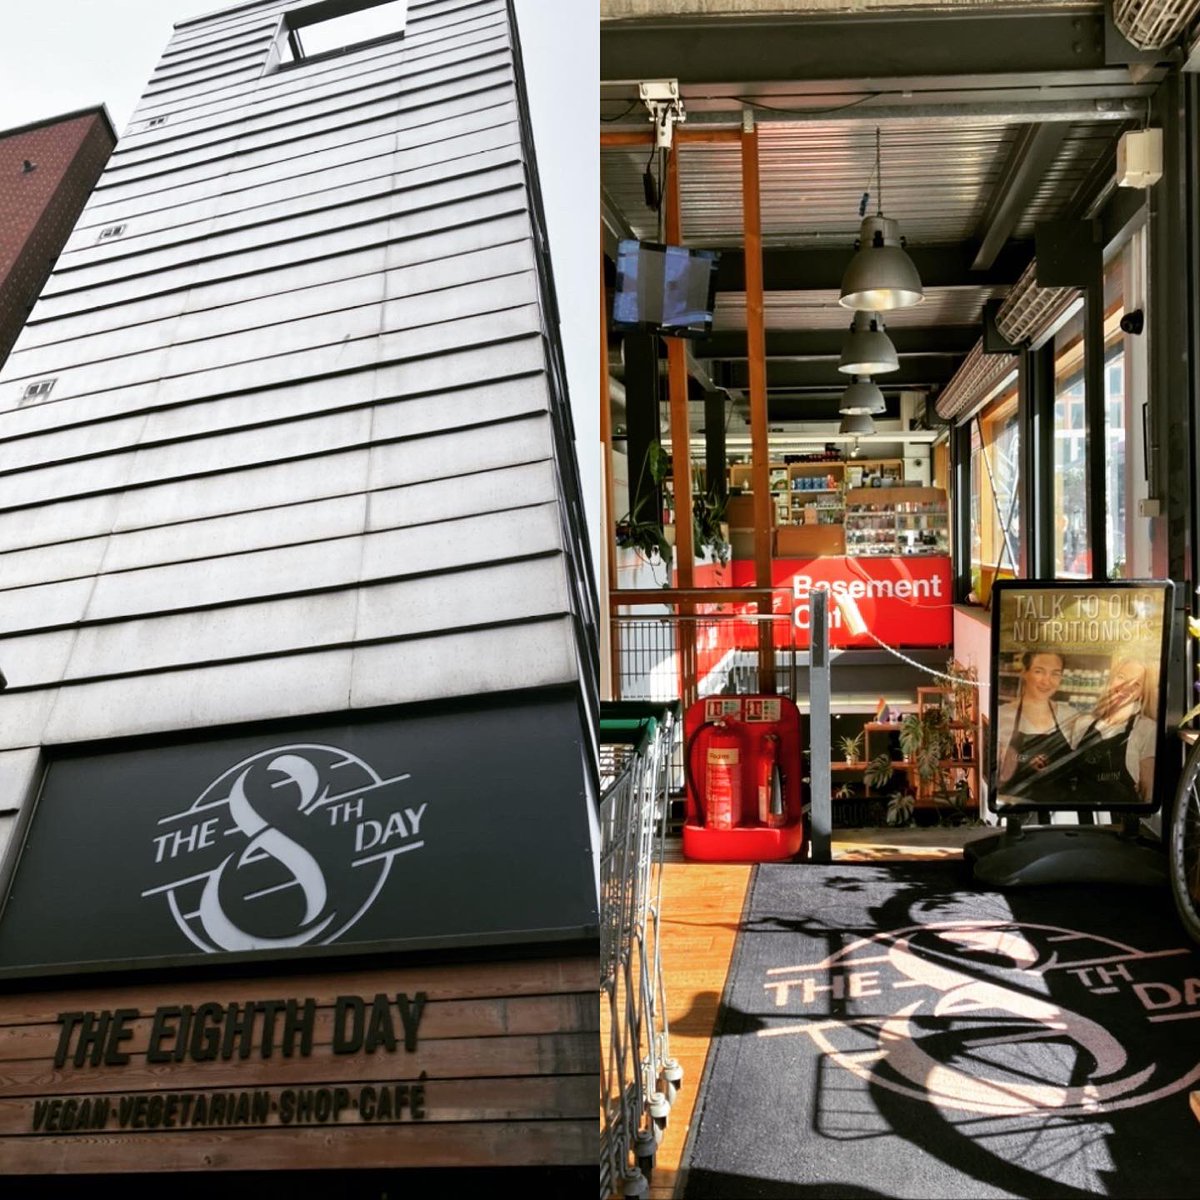 Mooching around #manchester last week- 2 #shops we were excited to visit…
.
@EighthDayVeg & @UnicornGrocery 
.
Both #workerscoops @cooperativesuk & both 
#inspiringplaces 
🙌🏽😊💚🙌🏼